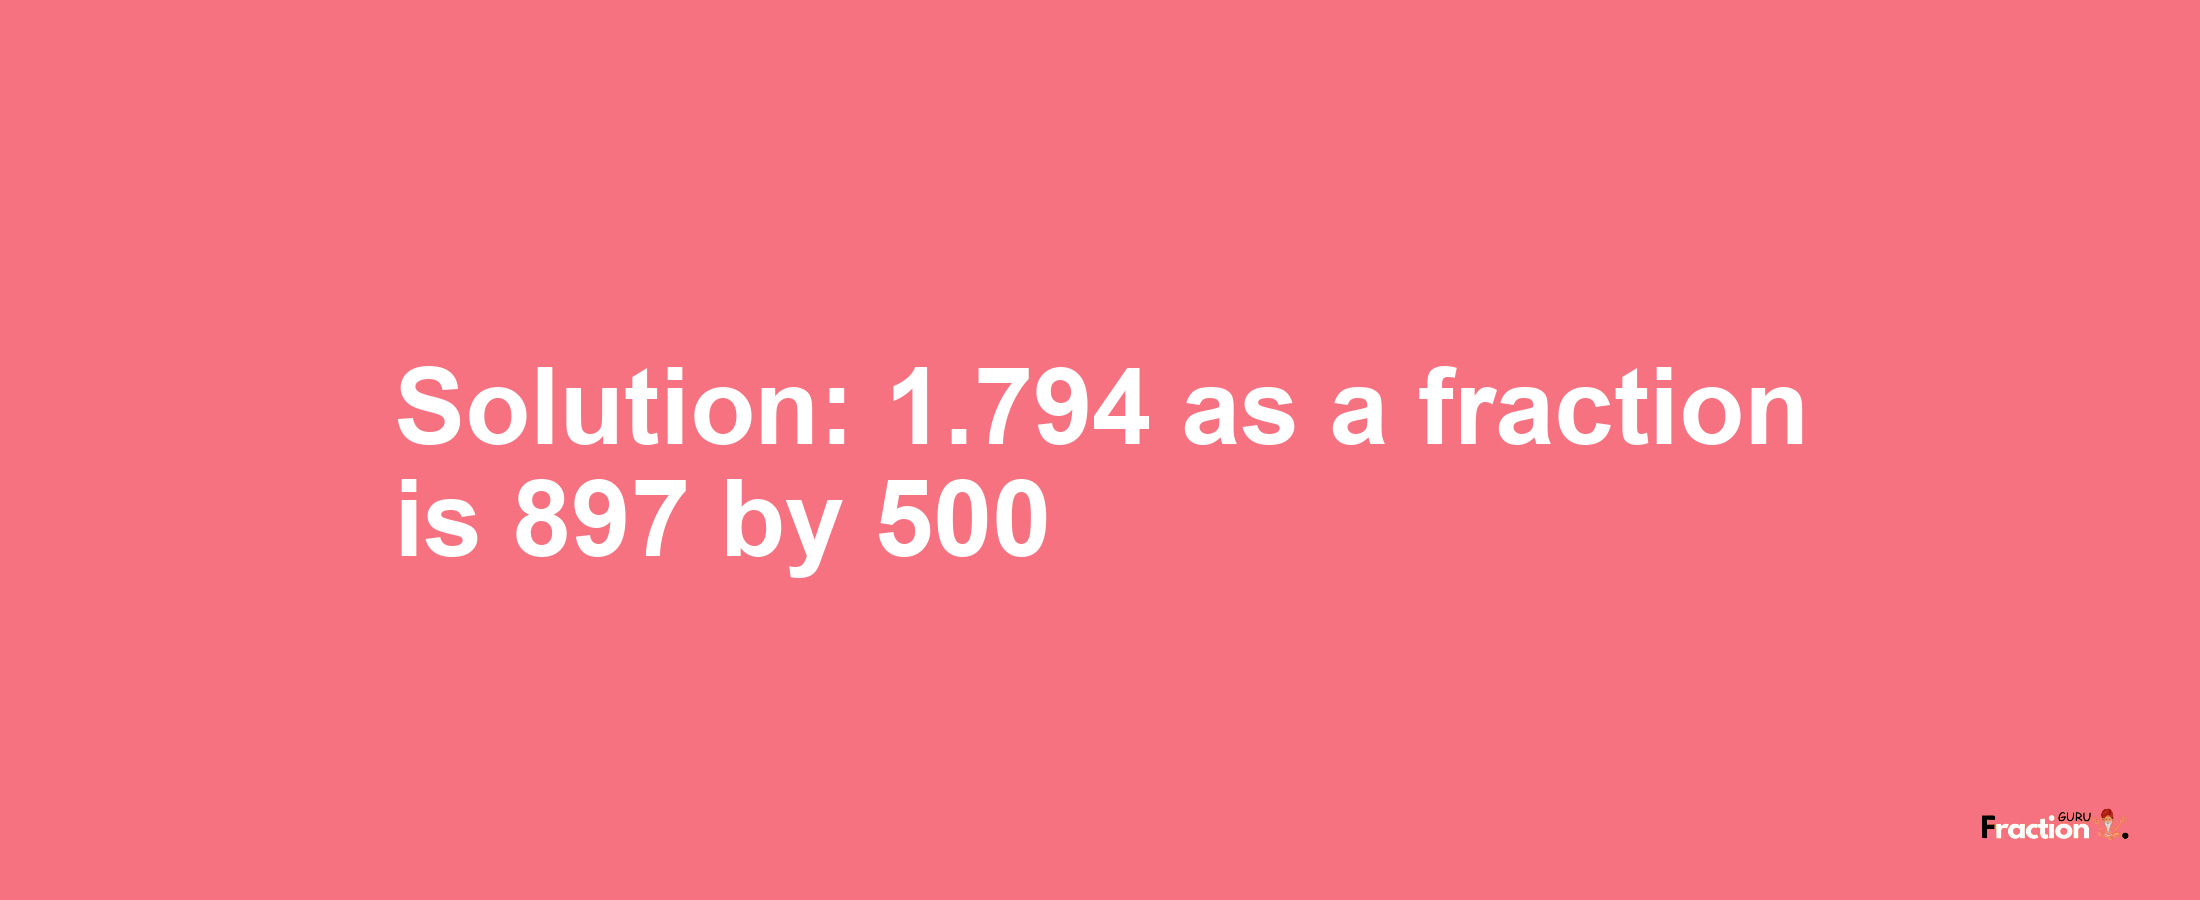 Solution:1.794 as a fraction is 897/500